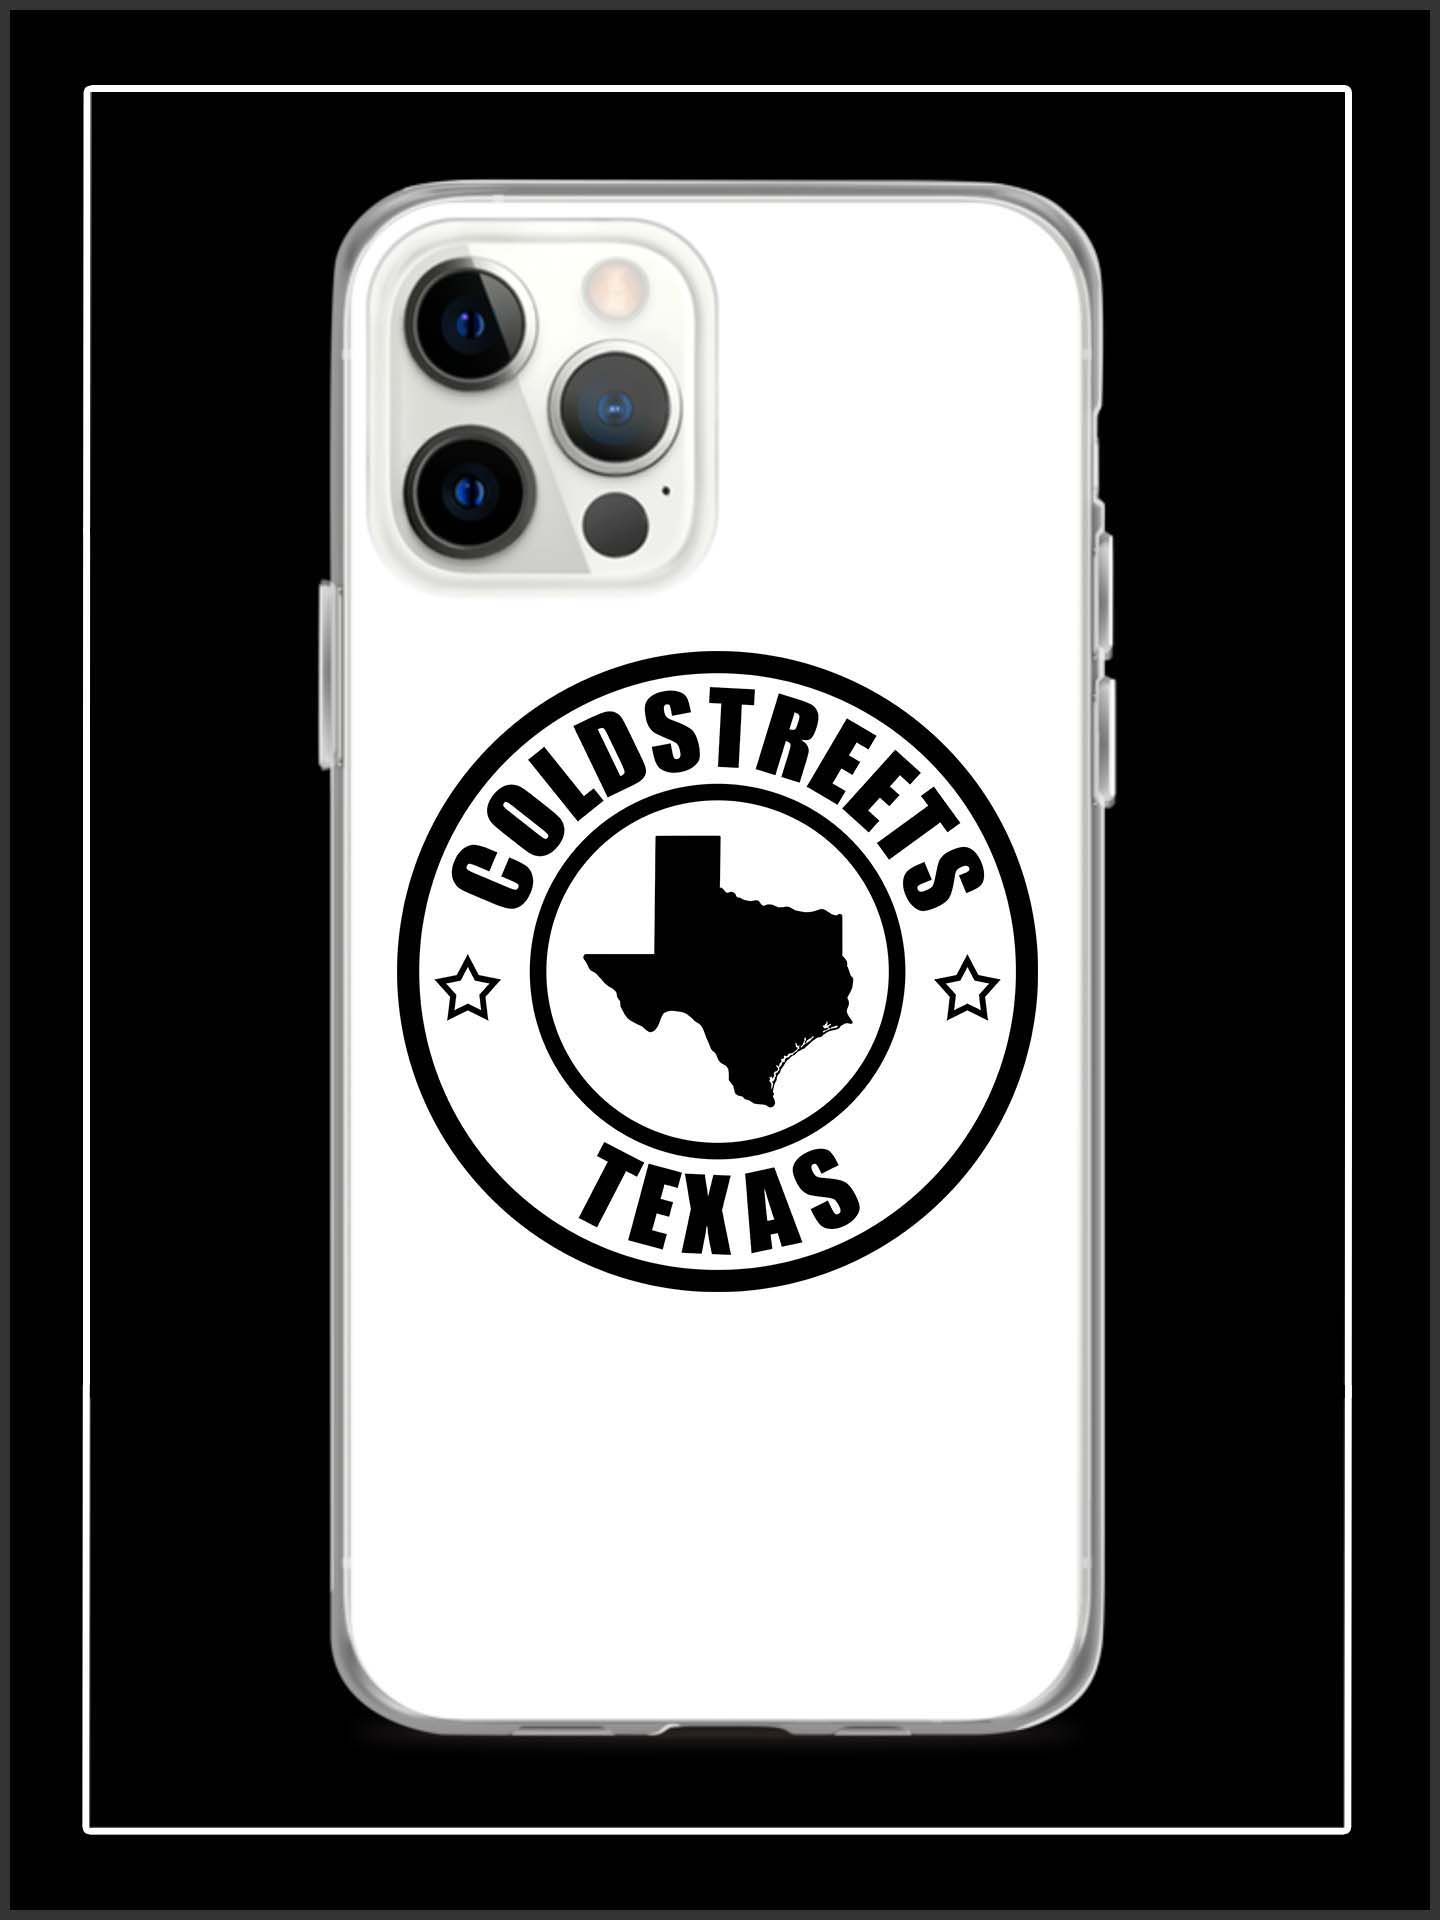 Cold Streets Texas iPhone Cases